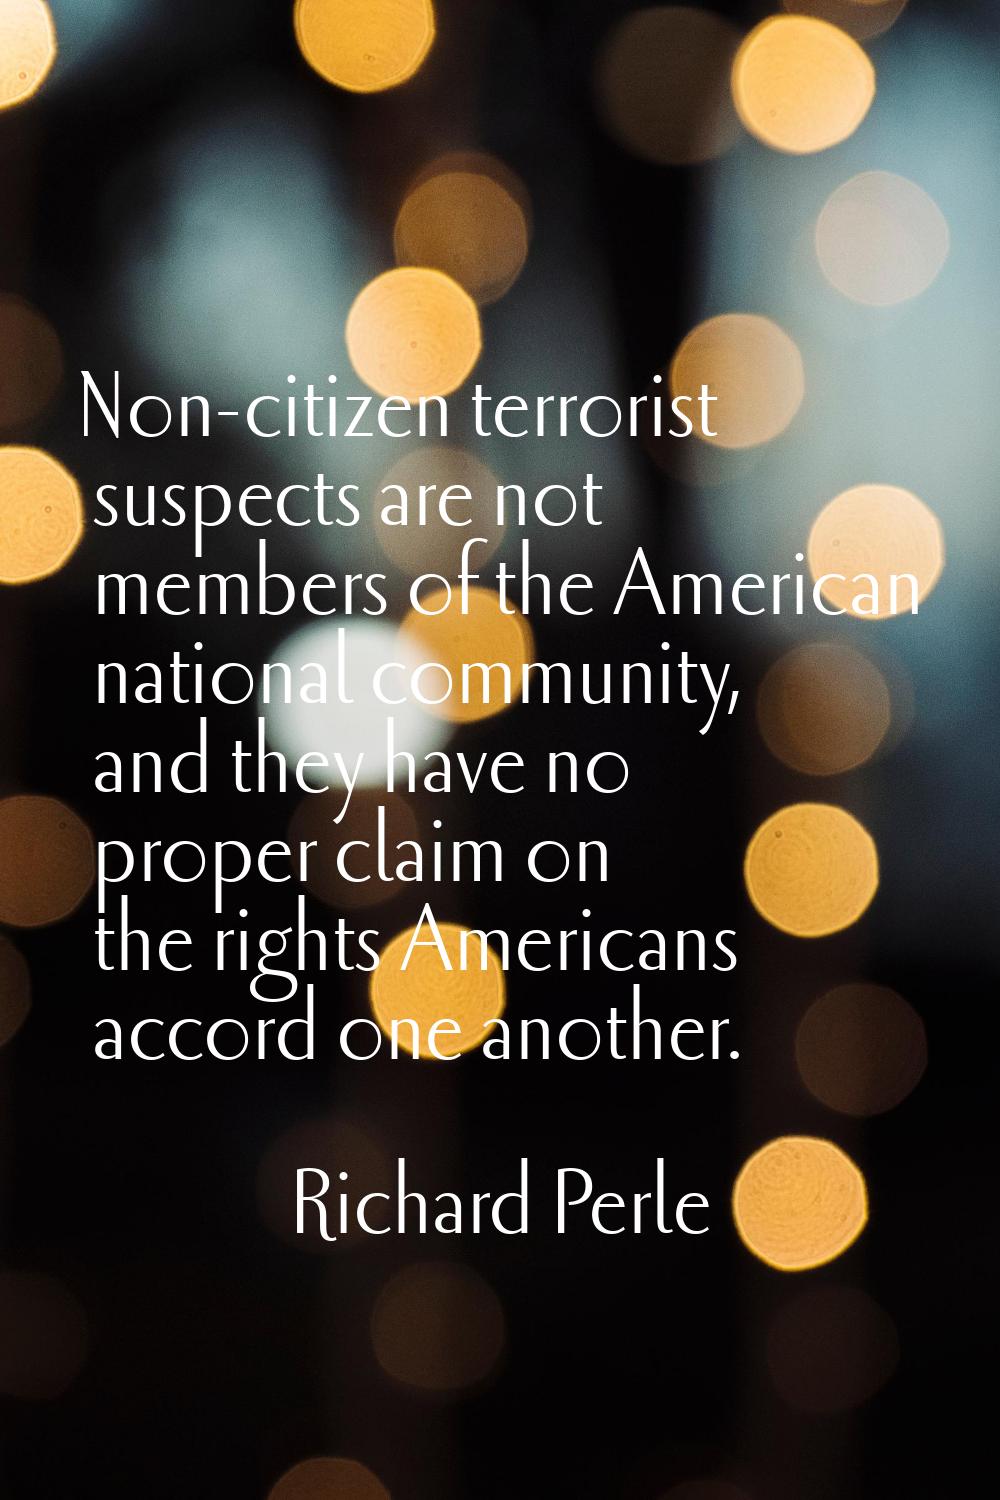 Non-citizen terrorist suspects are not members of the American national community, and they have no